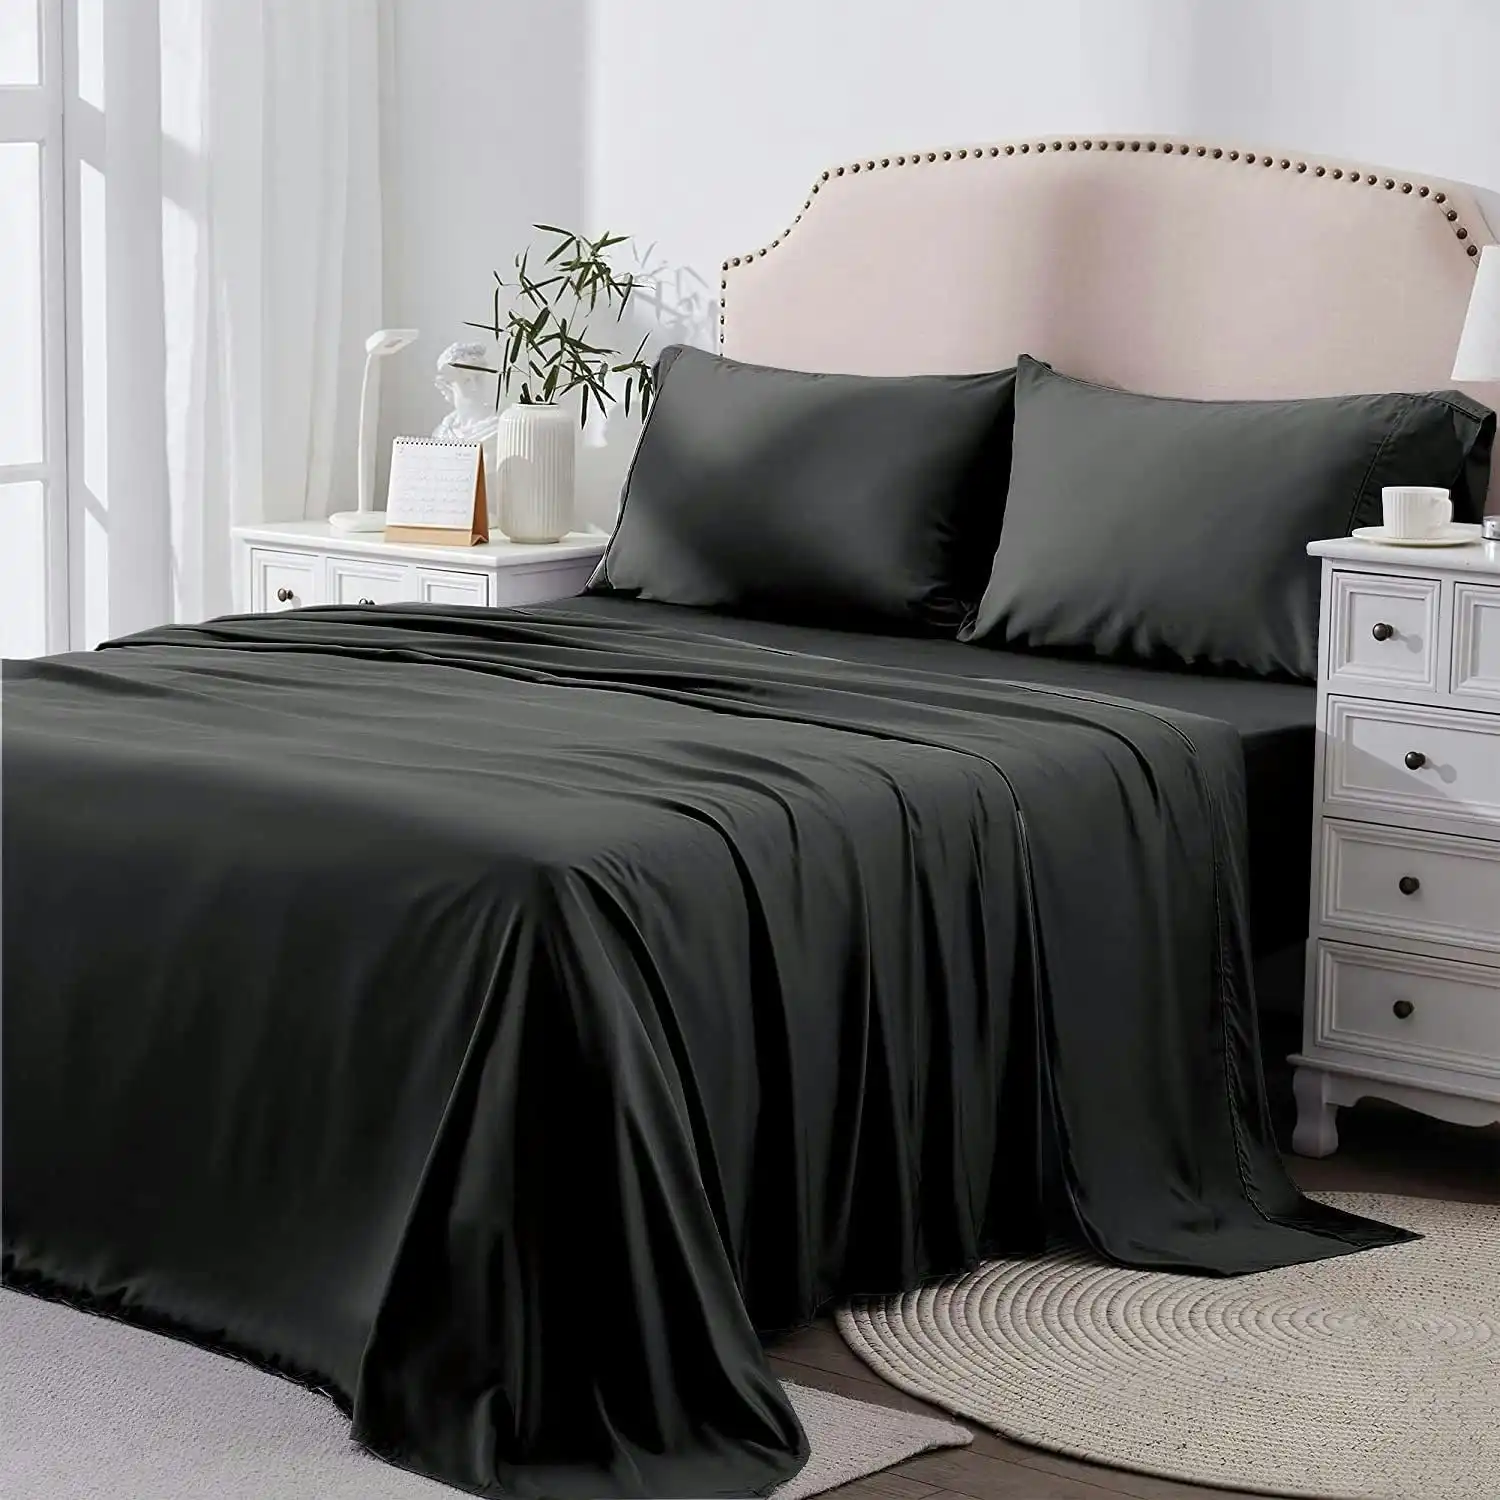 Queen Bed Sheet Set 2000TC Bedding Sheets and Pillowcases, Breathable, Wrinkle Fade Stain Resistant, Deep Pocket, Flat Fitted, Black